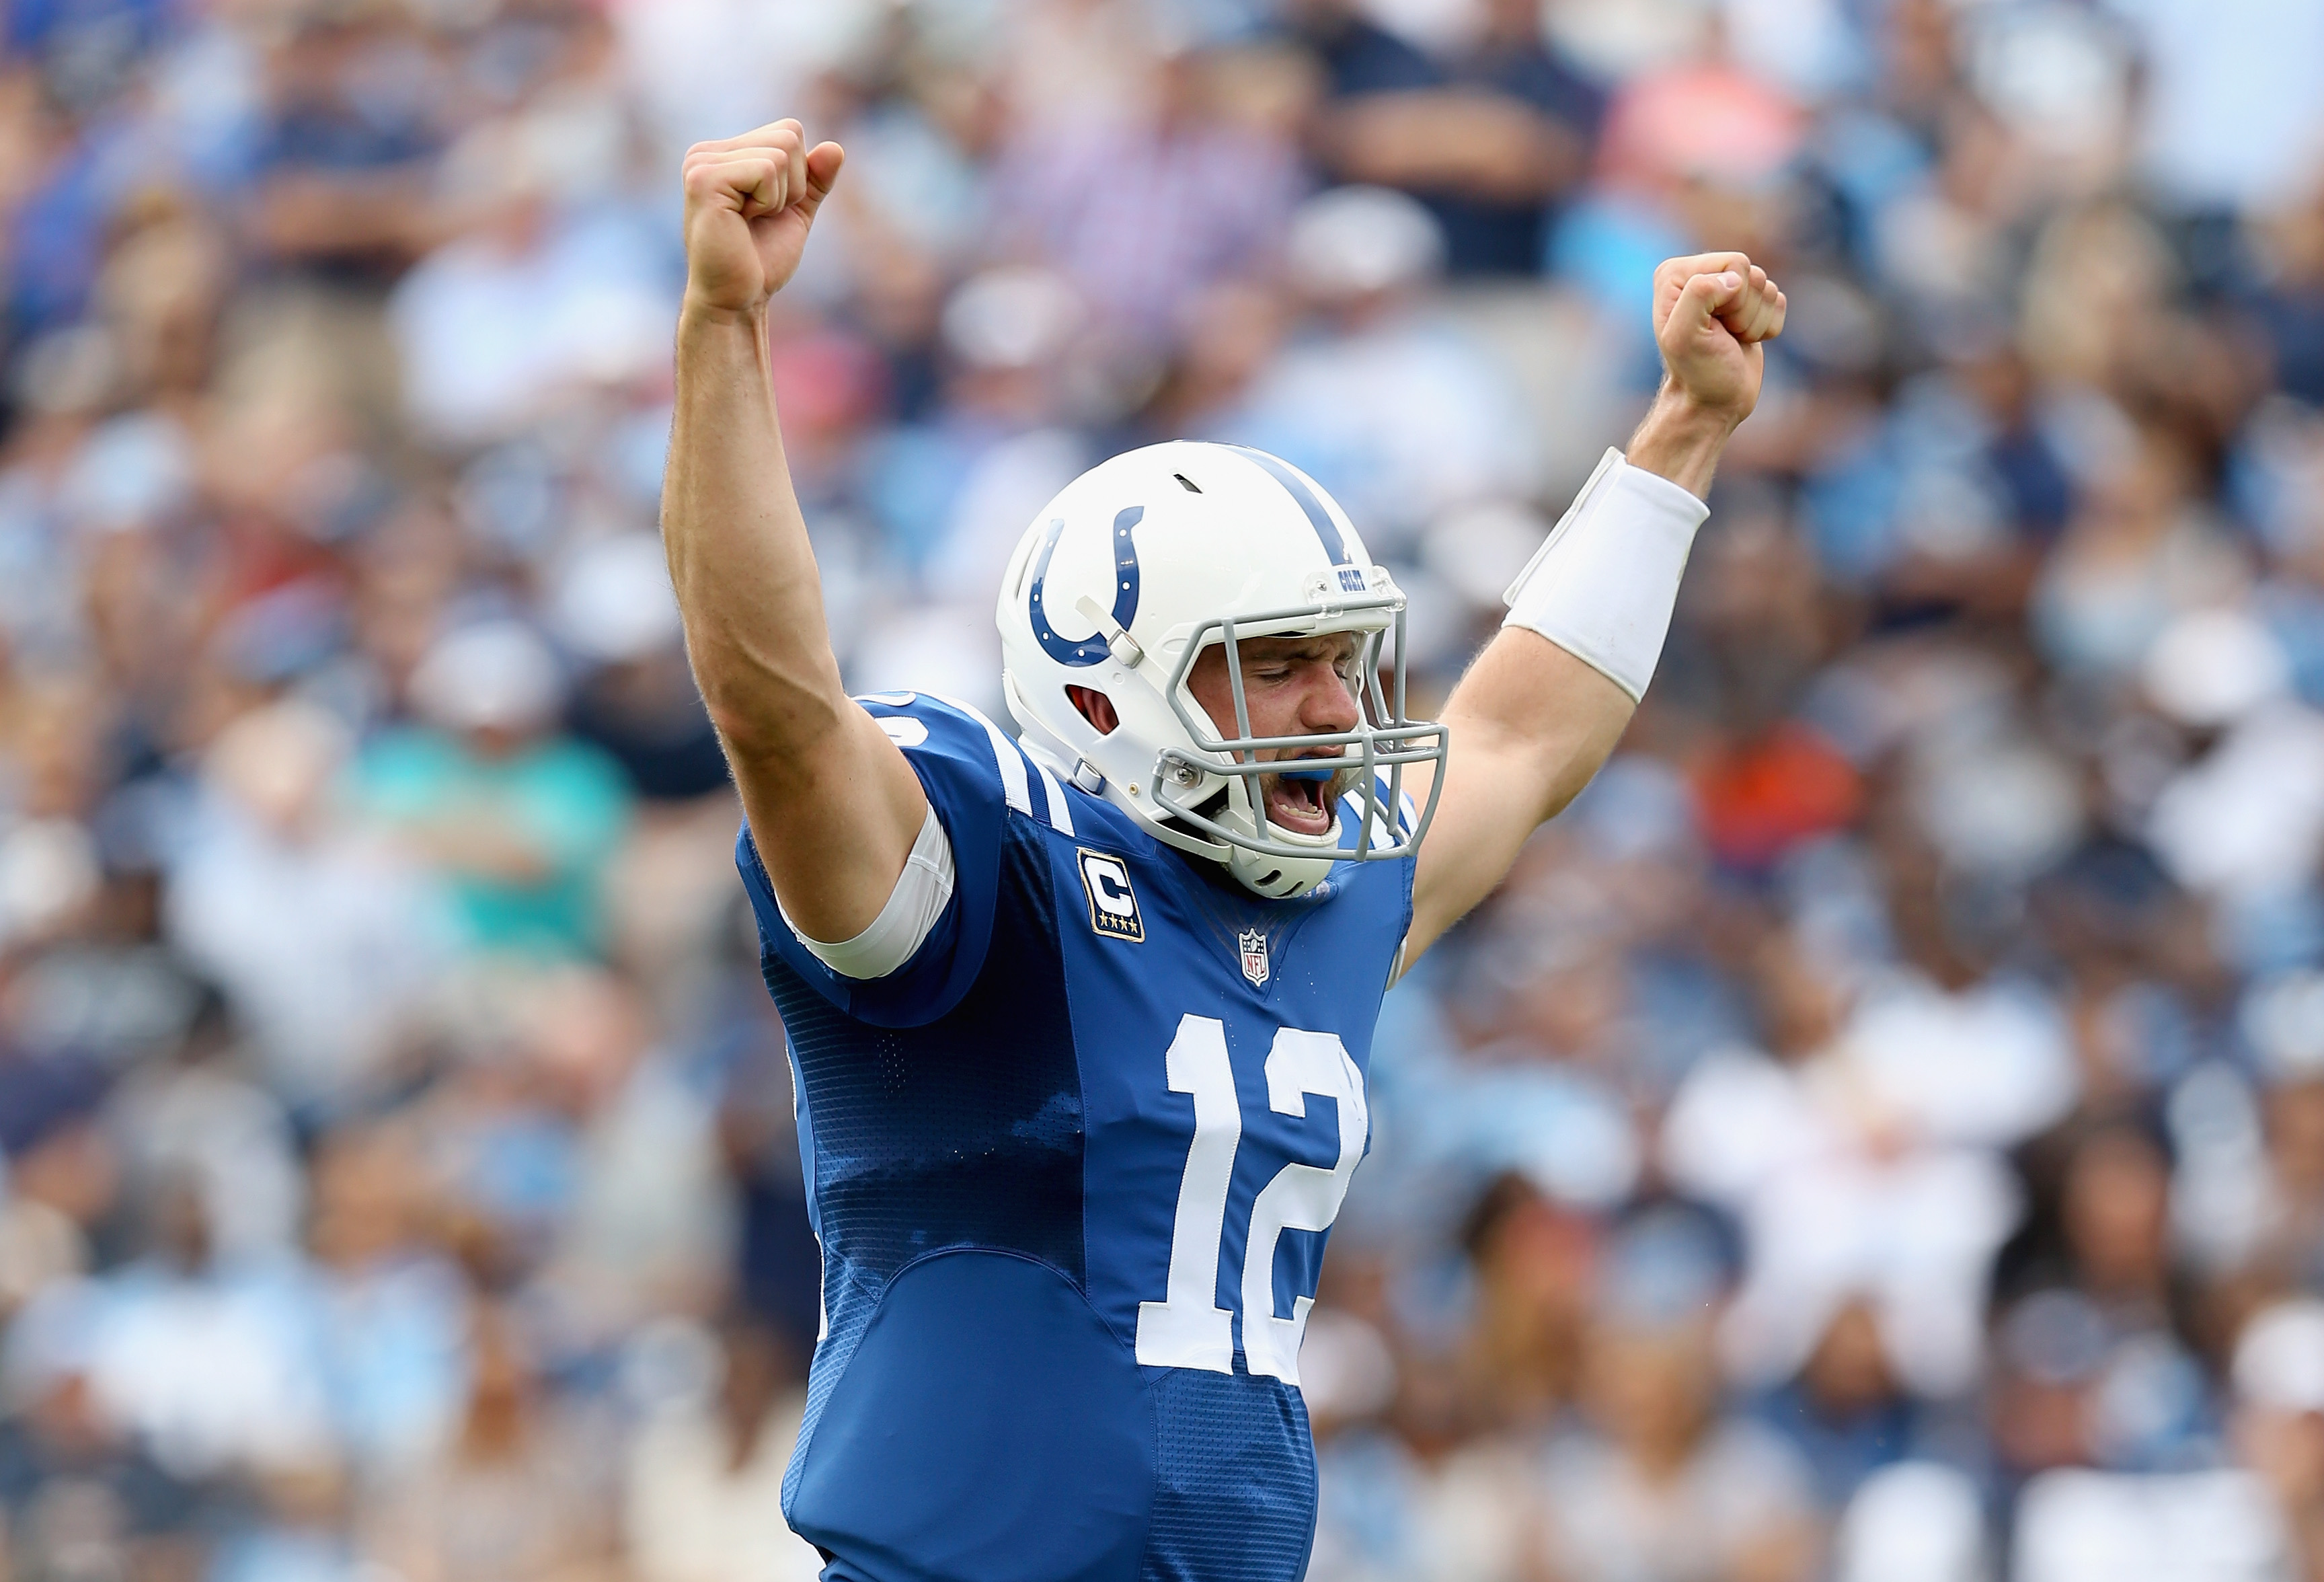 Most important details of Andrew Luck’s historic new contract.